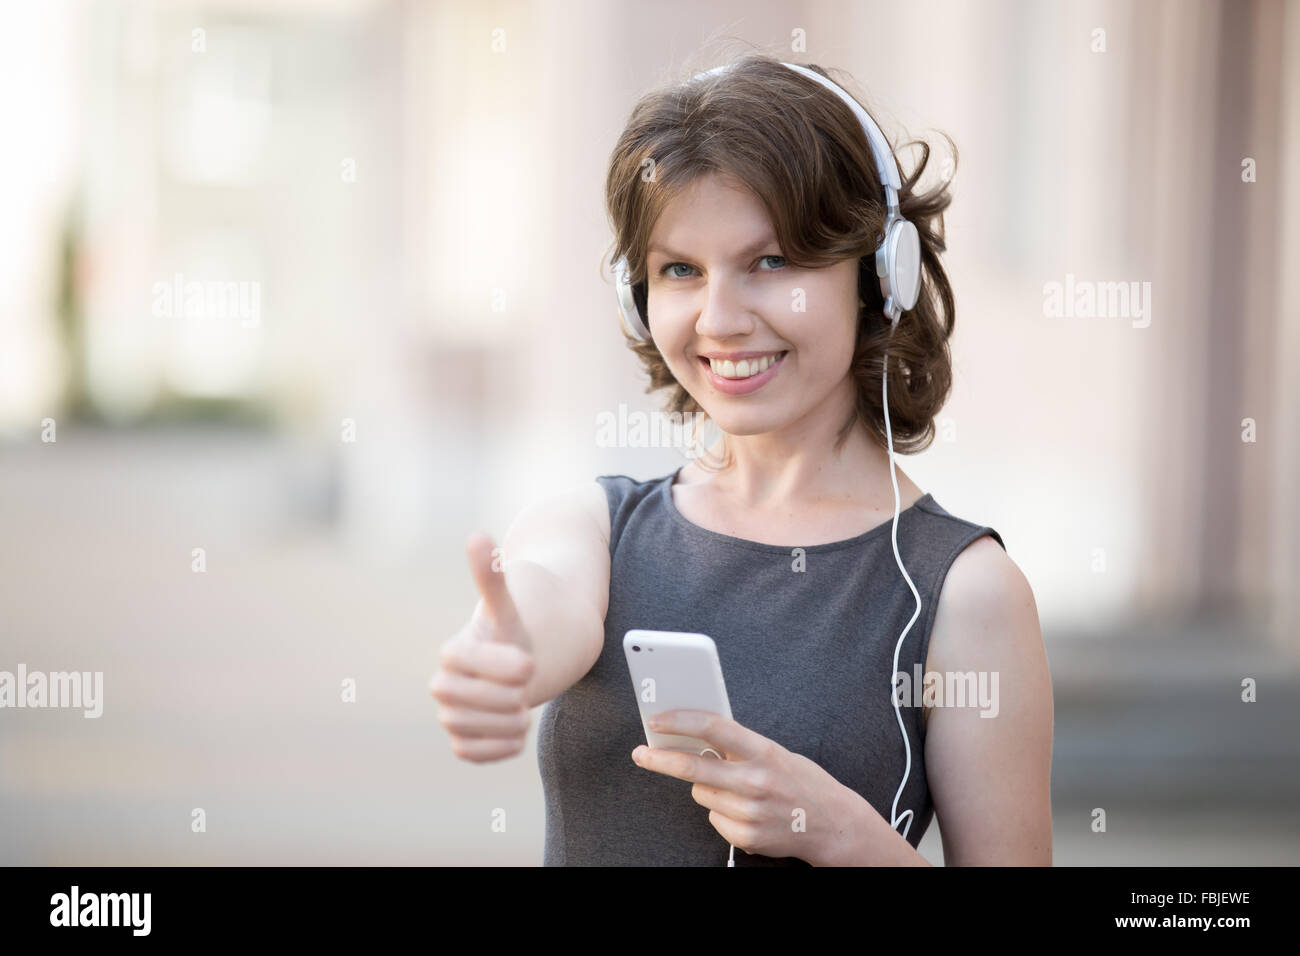 Portrait of happy woman in white earphones holding cellphone in hands on summer street, listening music, friendly smiling Stock Photo